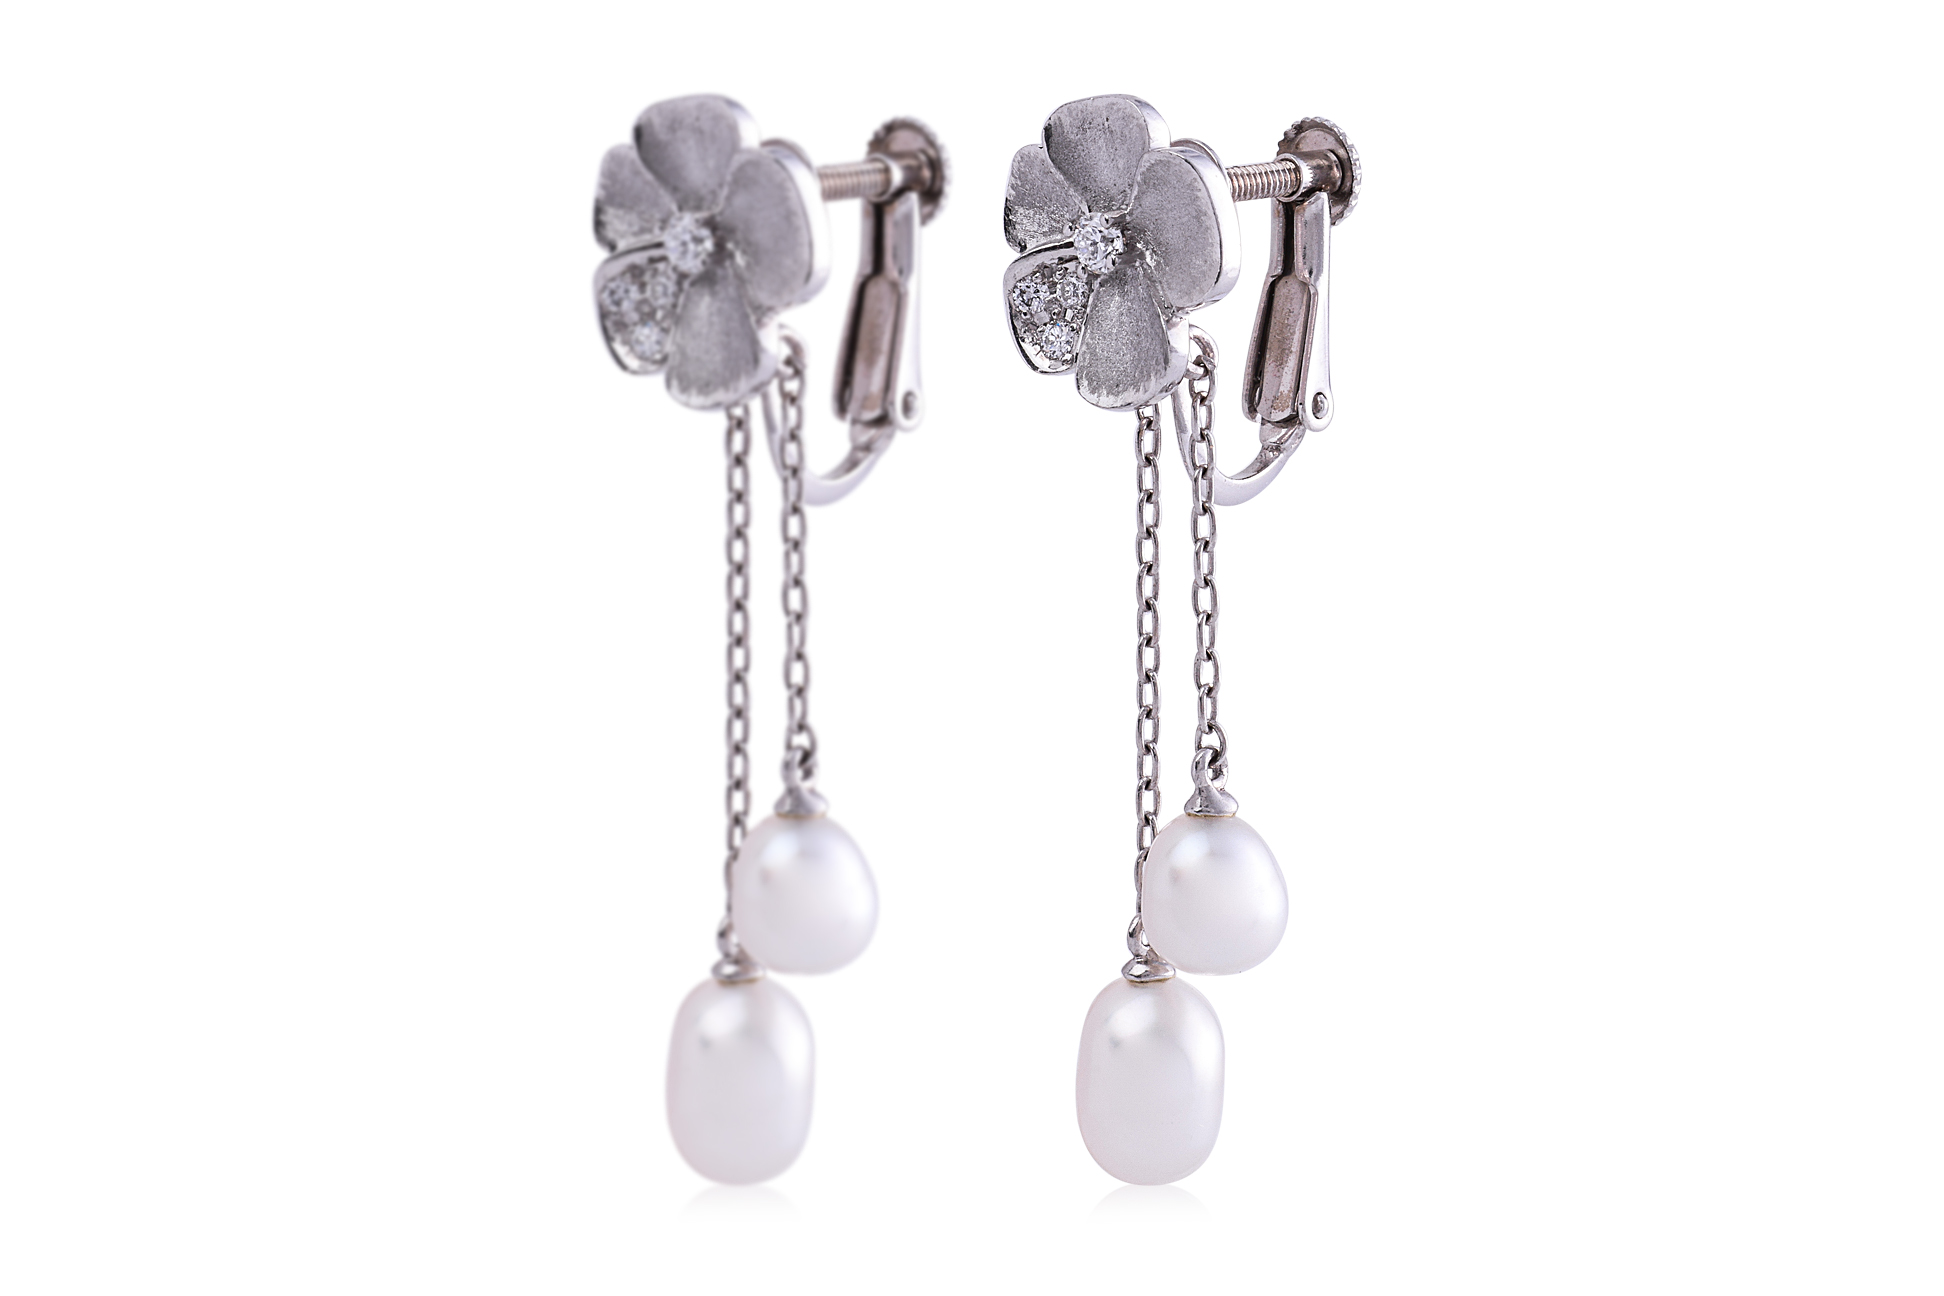 A PAIR OF CULTURED PEARL AND DIAMOND SCREW-BACK EARRINGS - Image 2 of 3